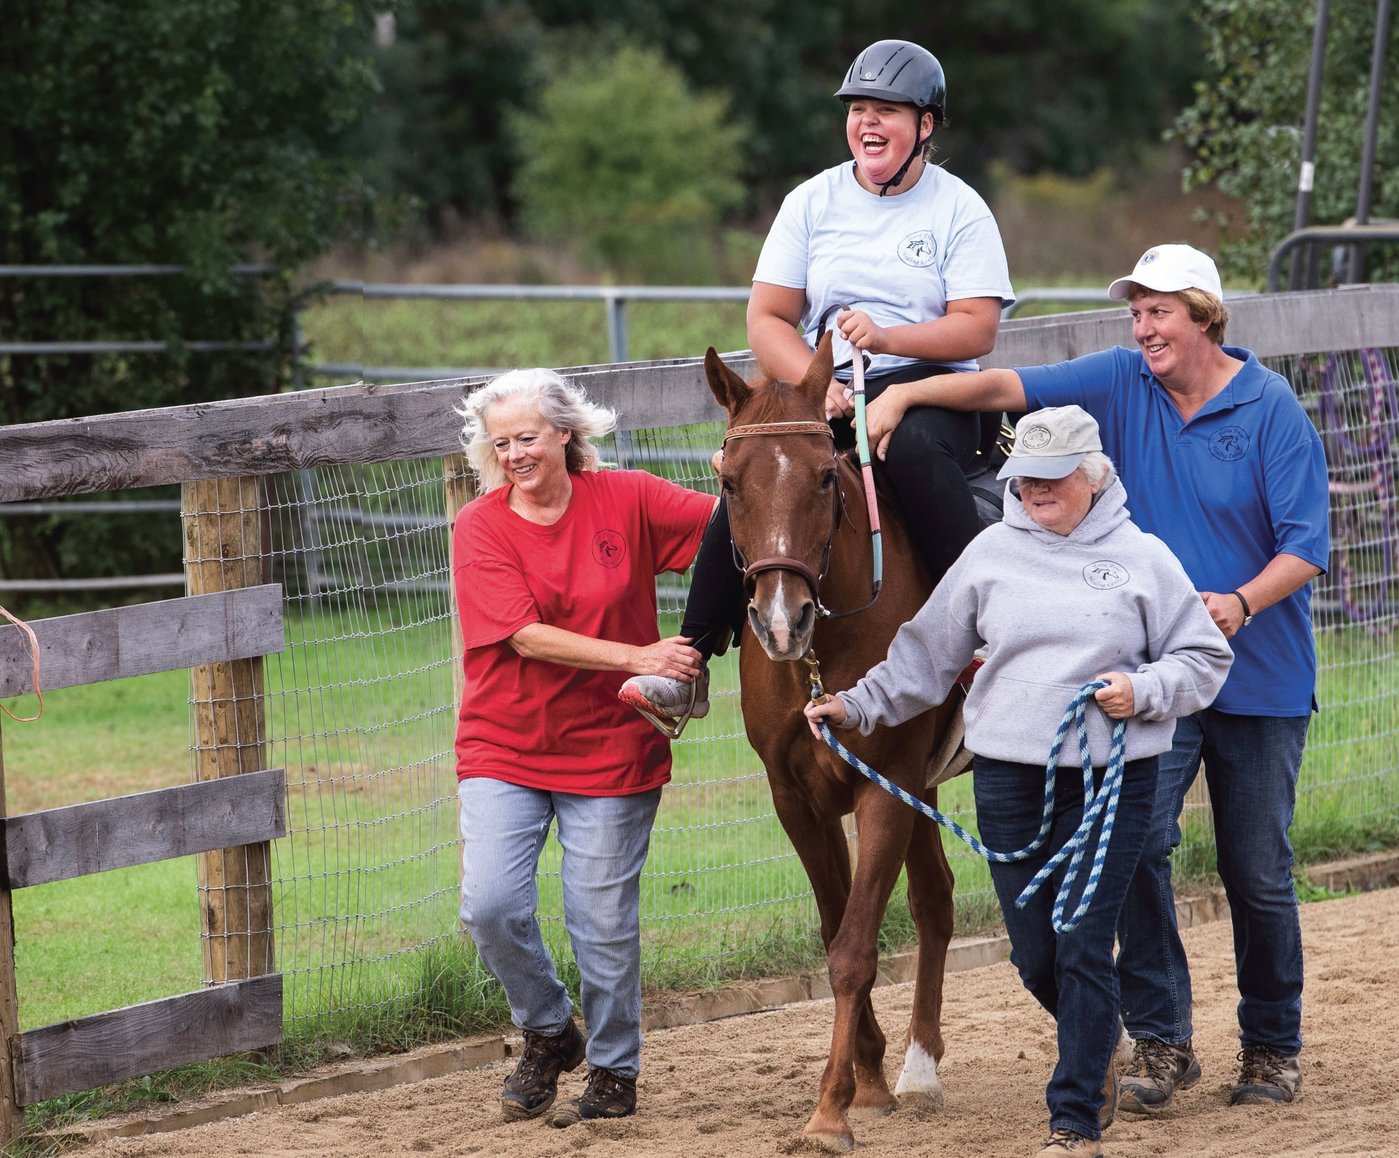 Three women lead a young girl as she rides a horse.